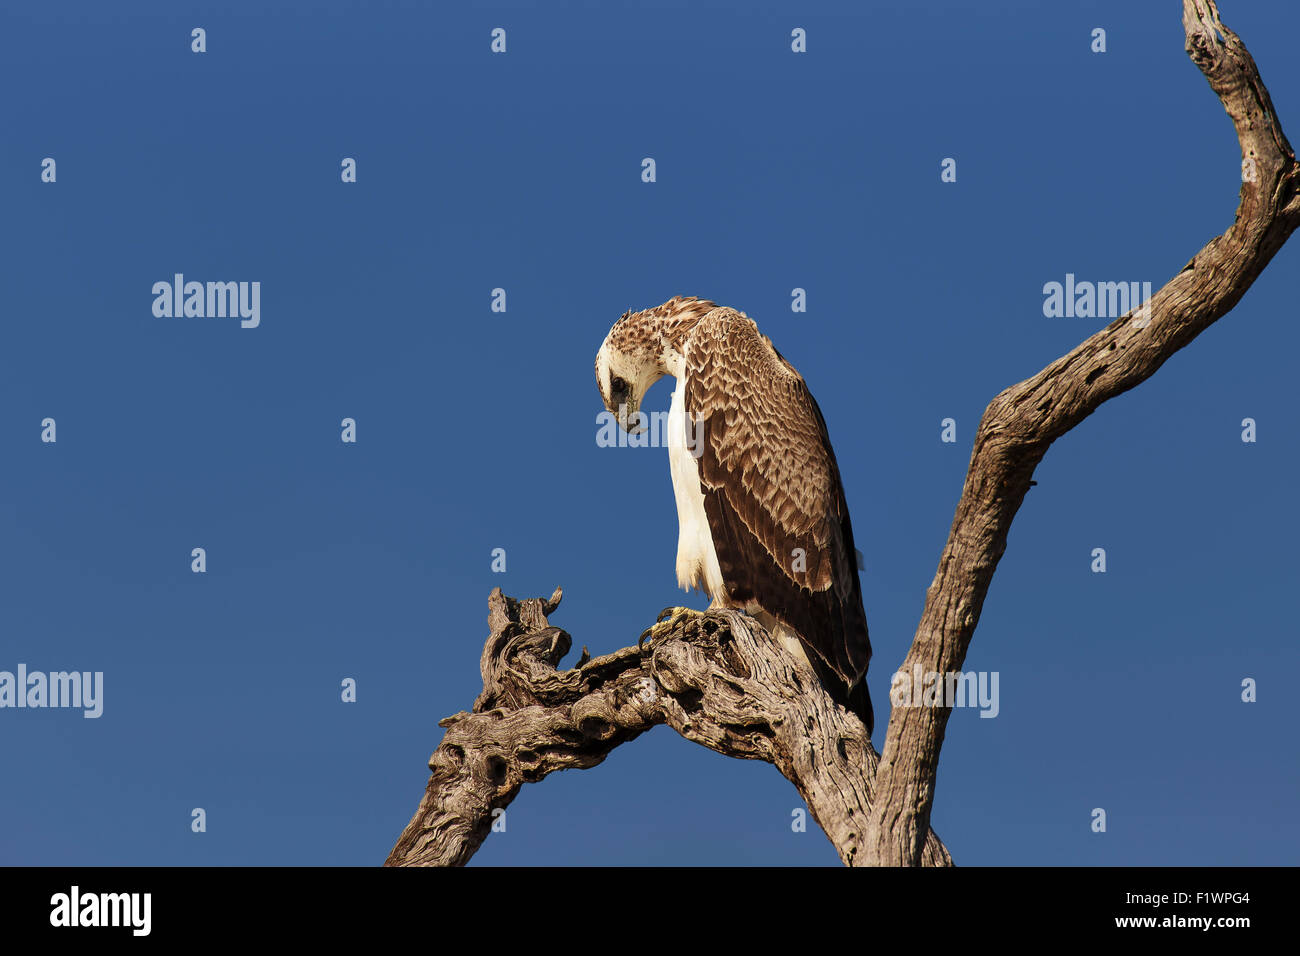 Immature Martial Eagle  (Polemaetus bellicosus) perched on branch against  blue sky - Kruger National Park (South Africa) Stock Photo